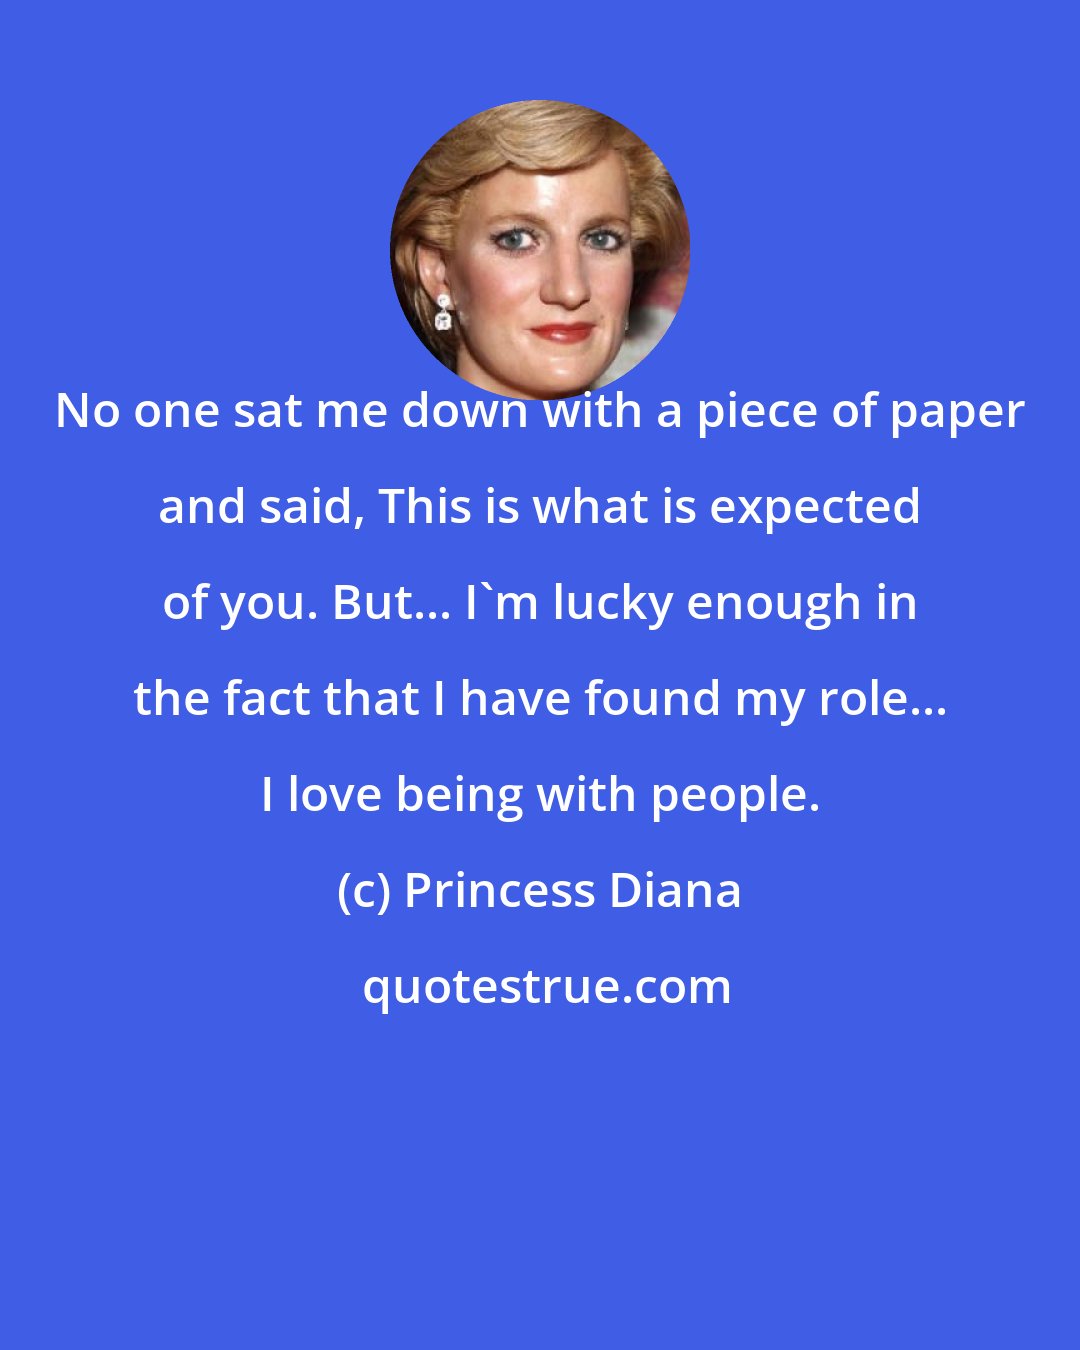 Princess Diana: No one sat me down with a piece of paper and said, This is what is expected of you. But... I'm lucky enough in the fact that I have found my role... I love being with people.